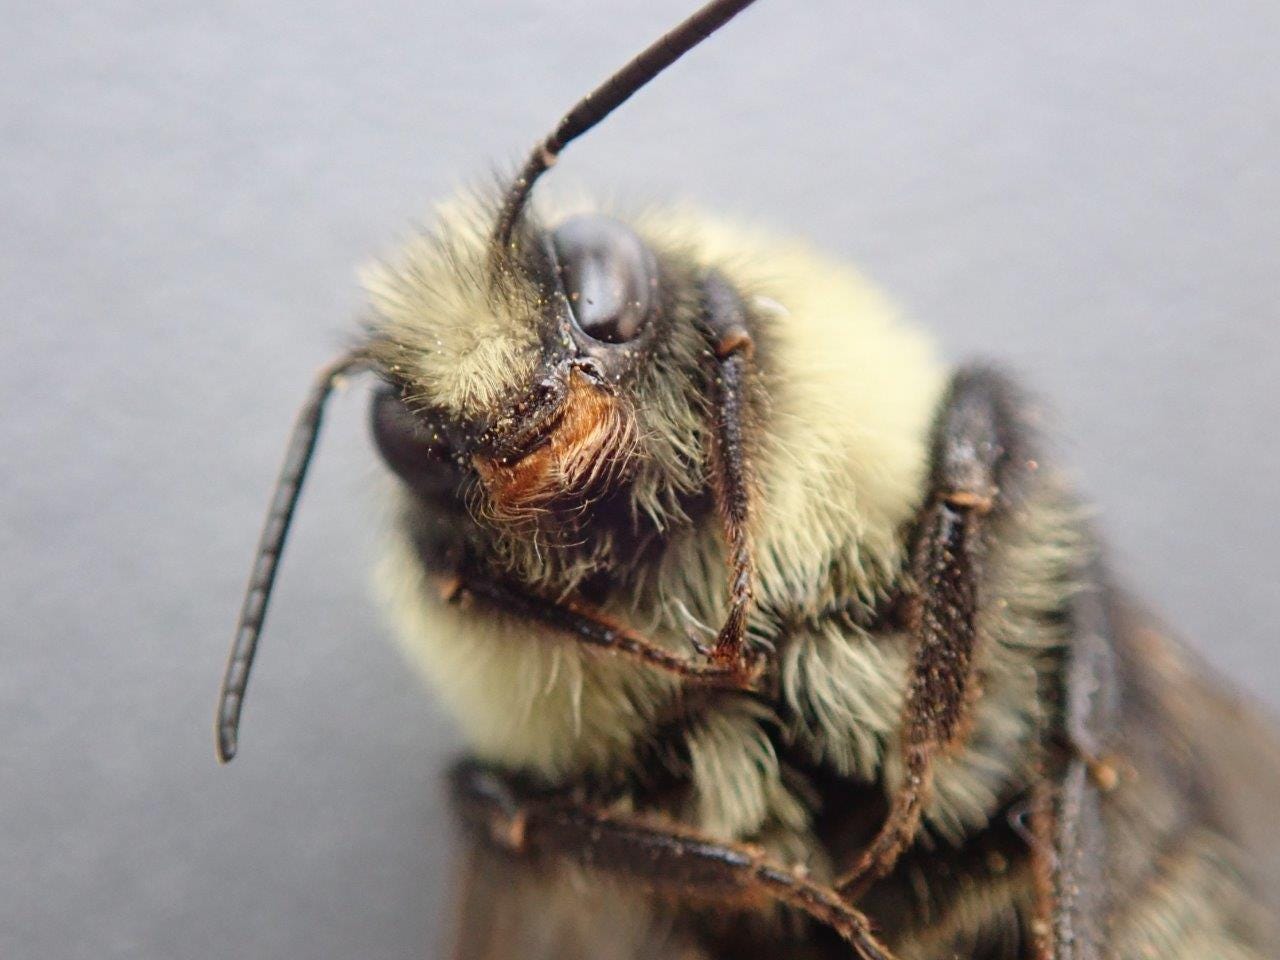 How to Identify a Bumble Bee